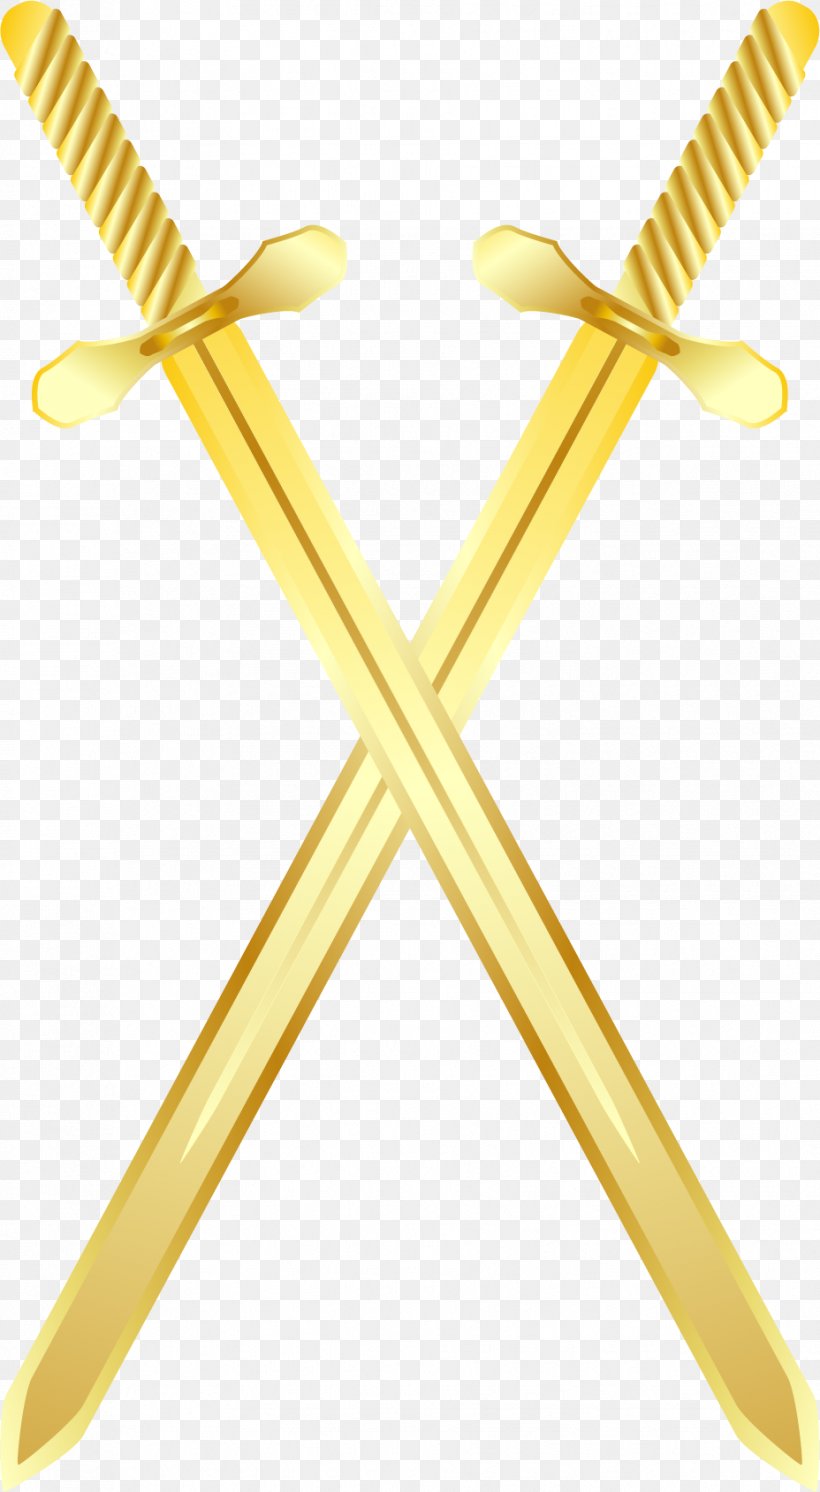 Sword Euclidean Vector Computer File Png 928x16px Sword Cold Weapon Drawing Gold Resource Download Free